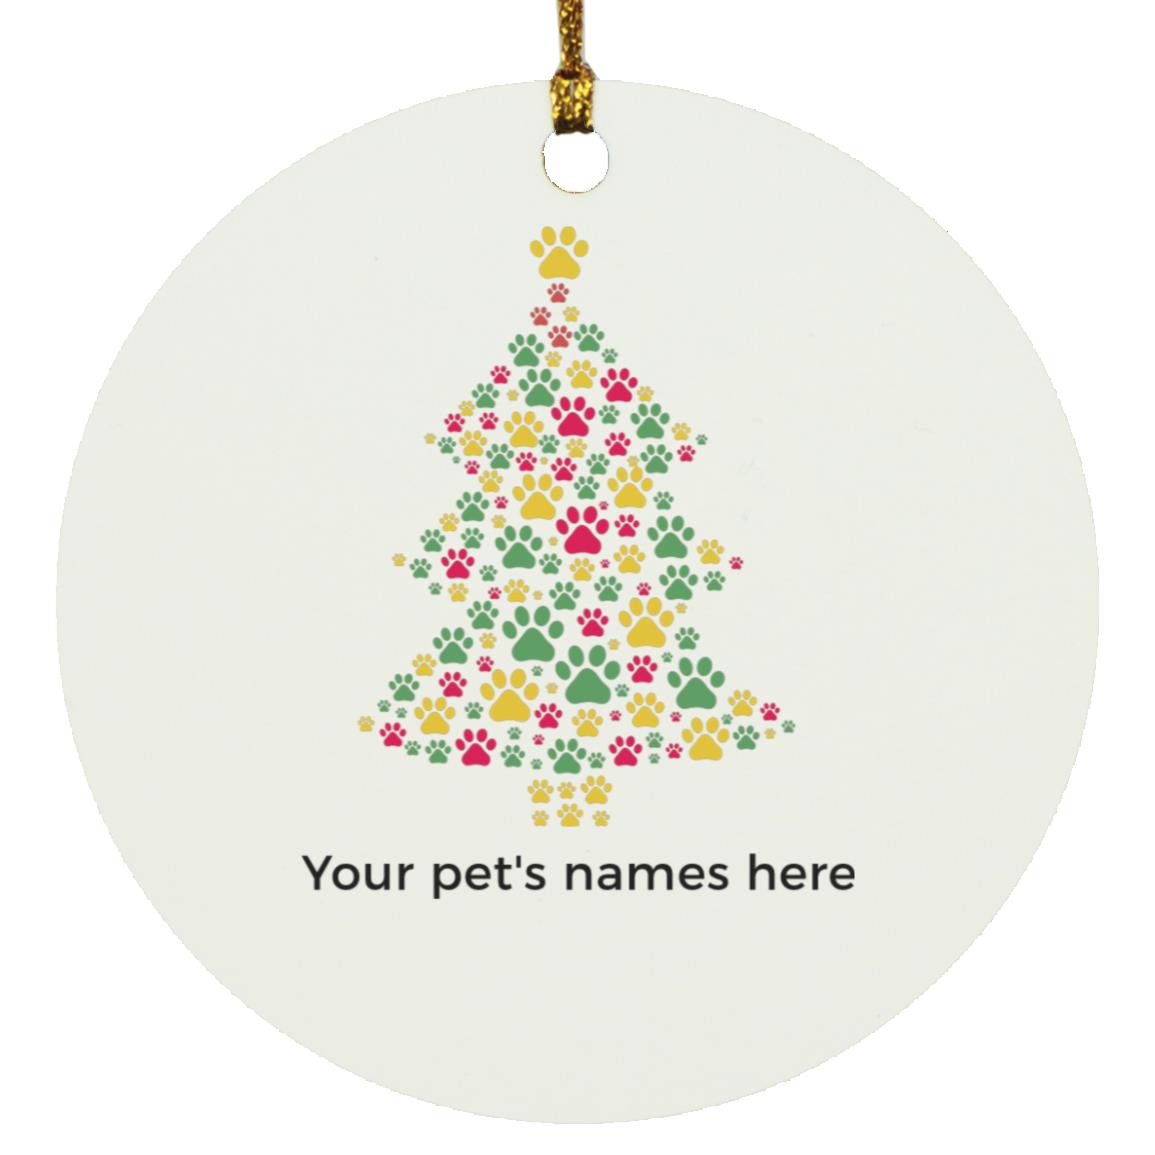 Limited Time Offer 50% OFF! Happy Pawlidays Christmas Tree Personalized Circle Ornament